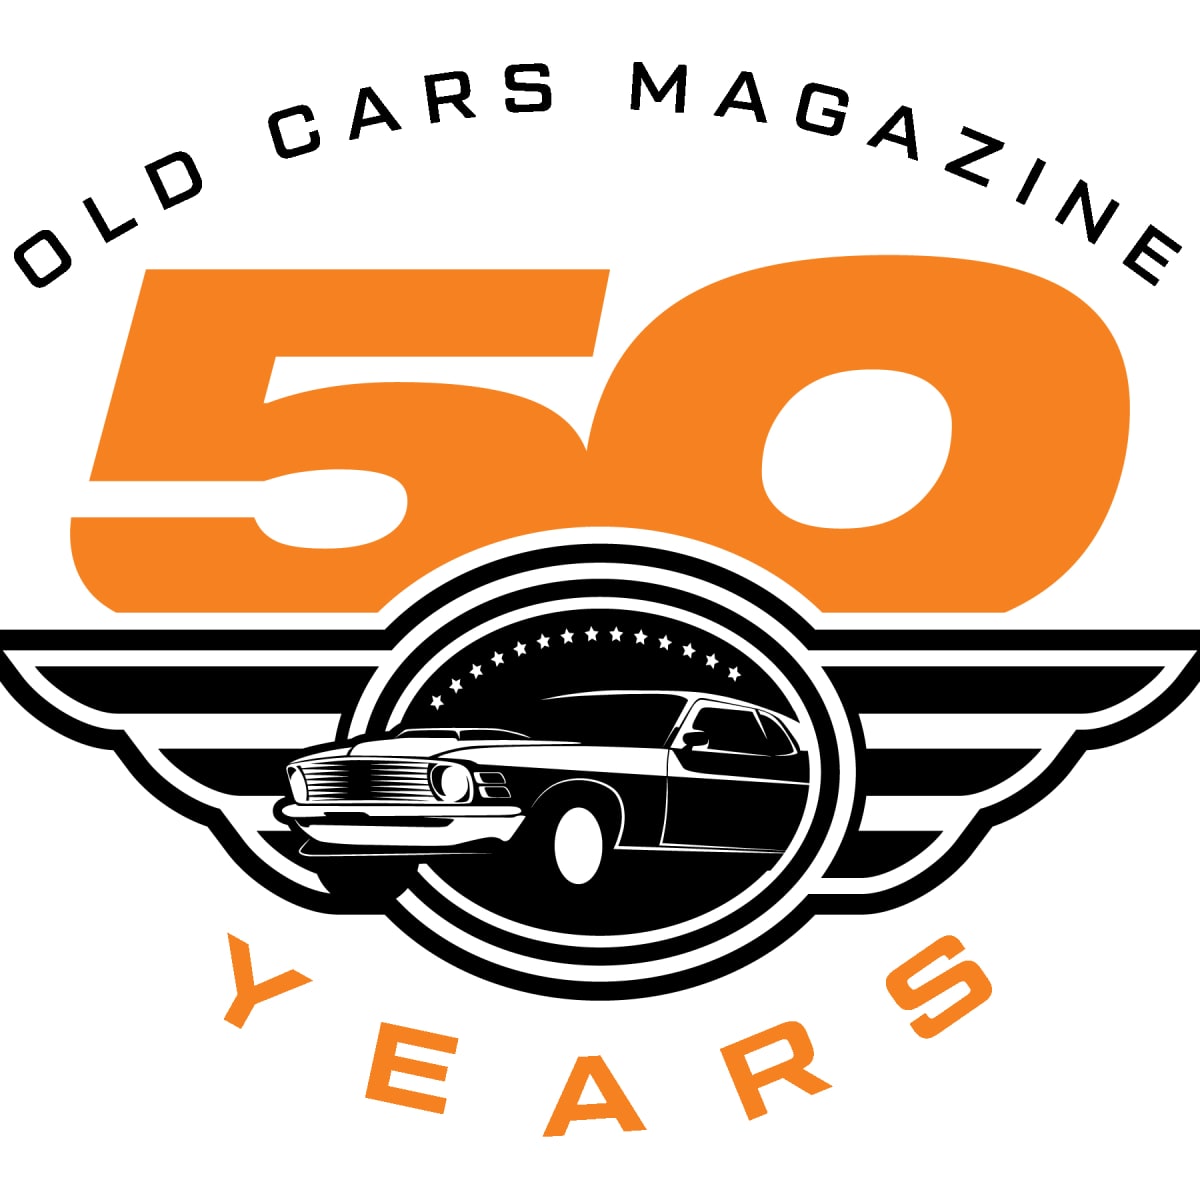 As we celebrate a half century, Old Cars takes a stroll down memory lane.